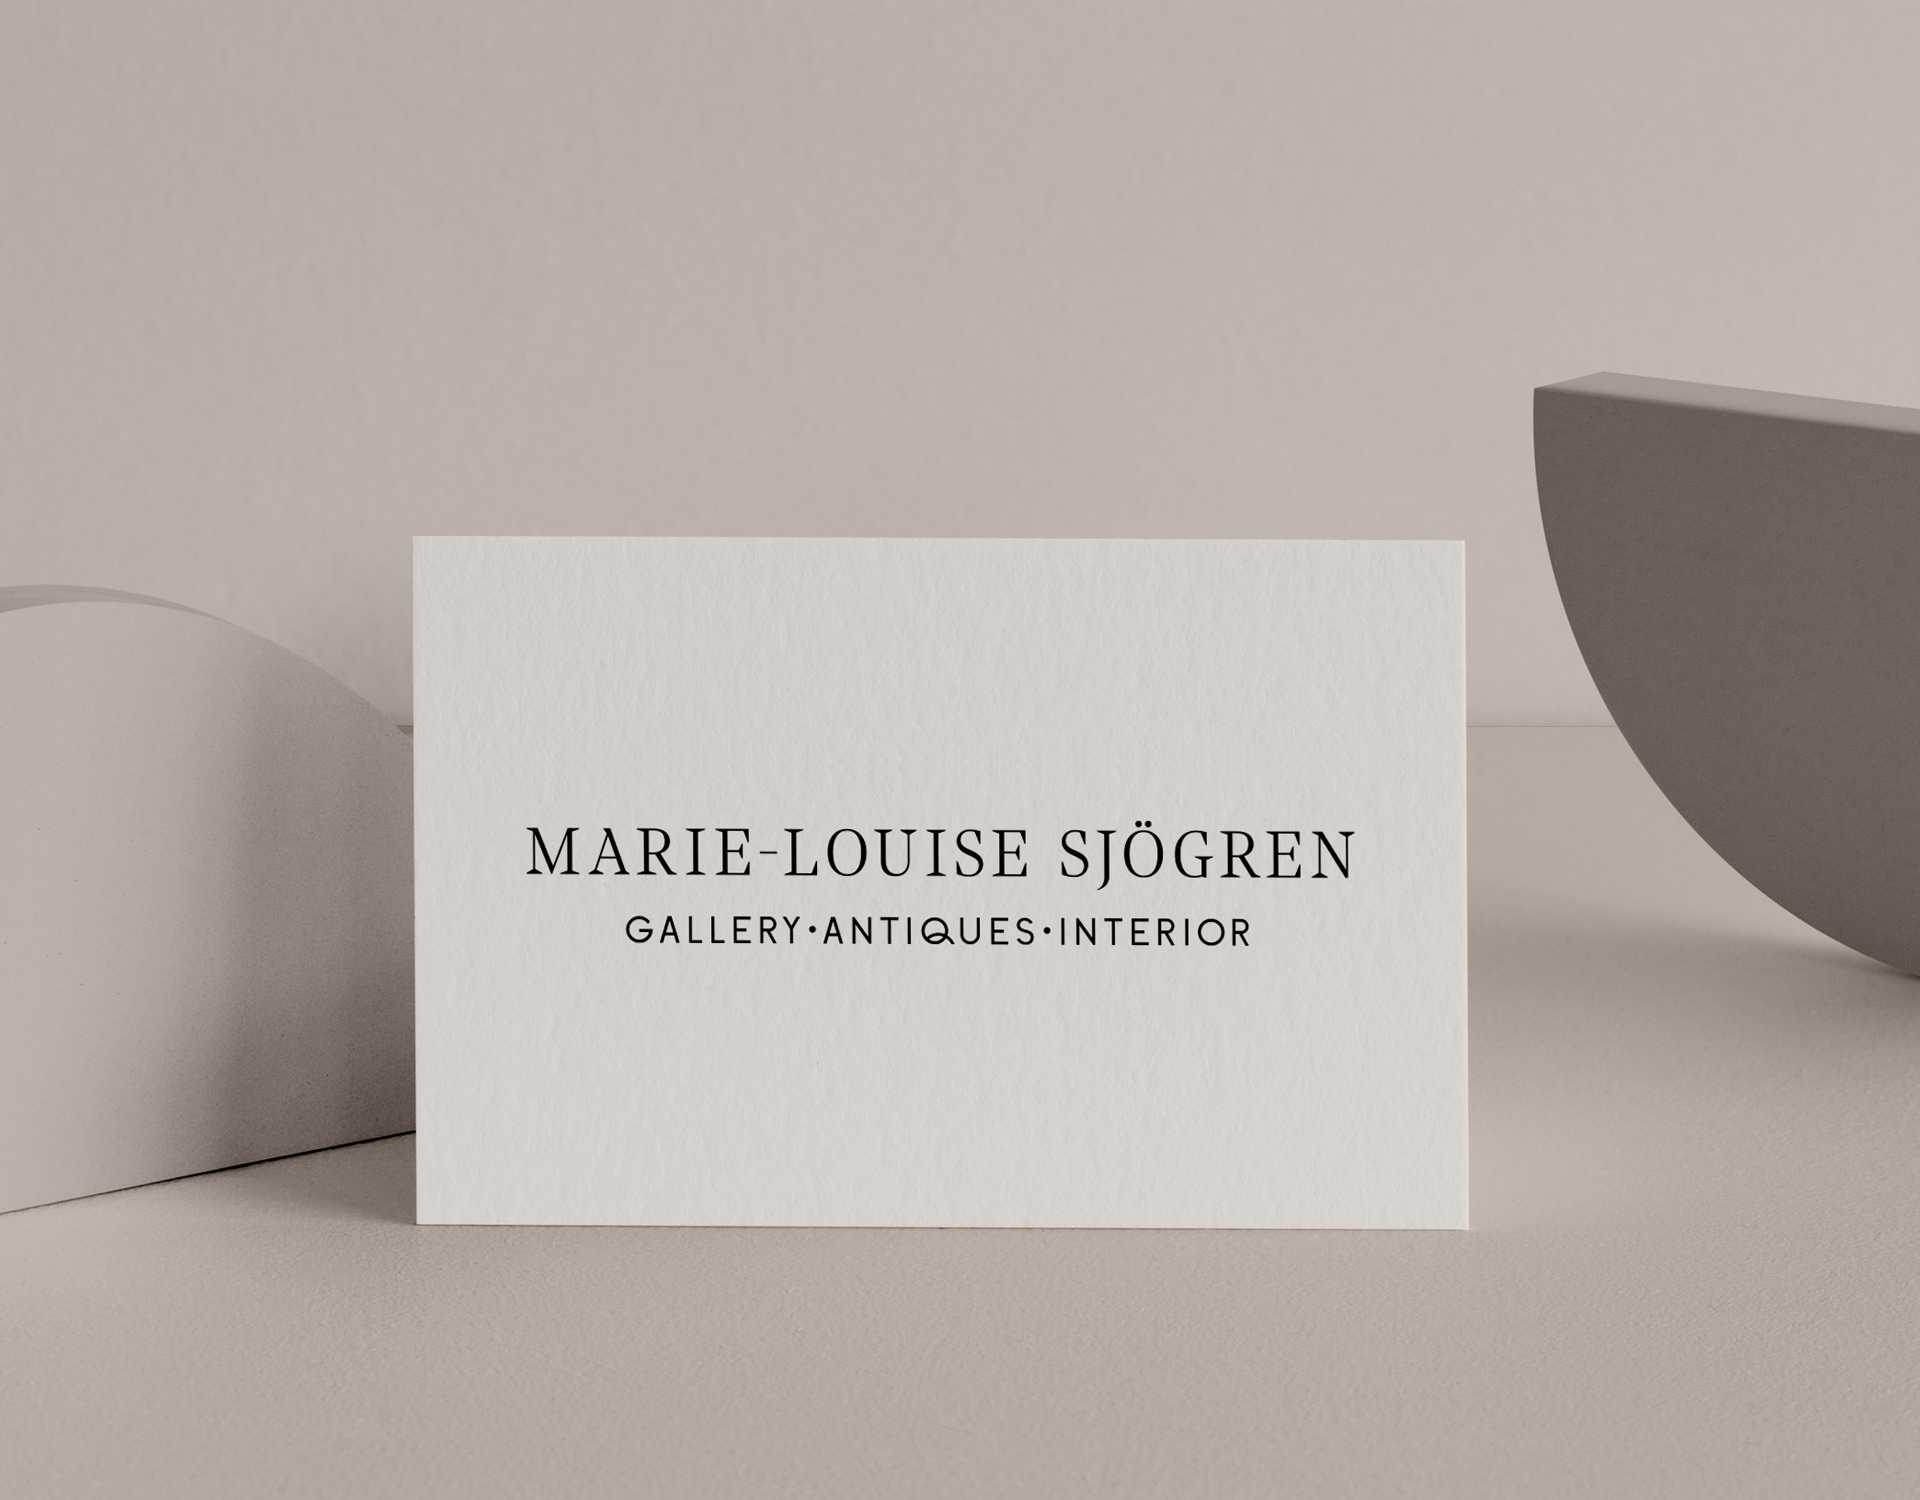 Business cards for Marie Louise Sjögren designed by Studio Poi